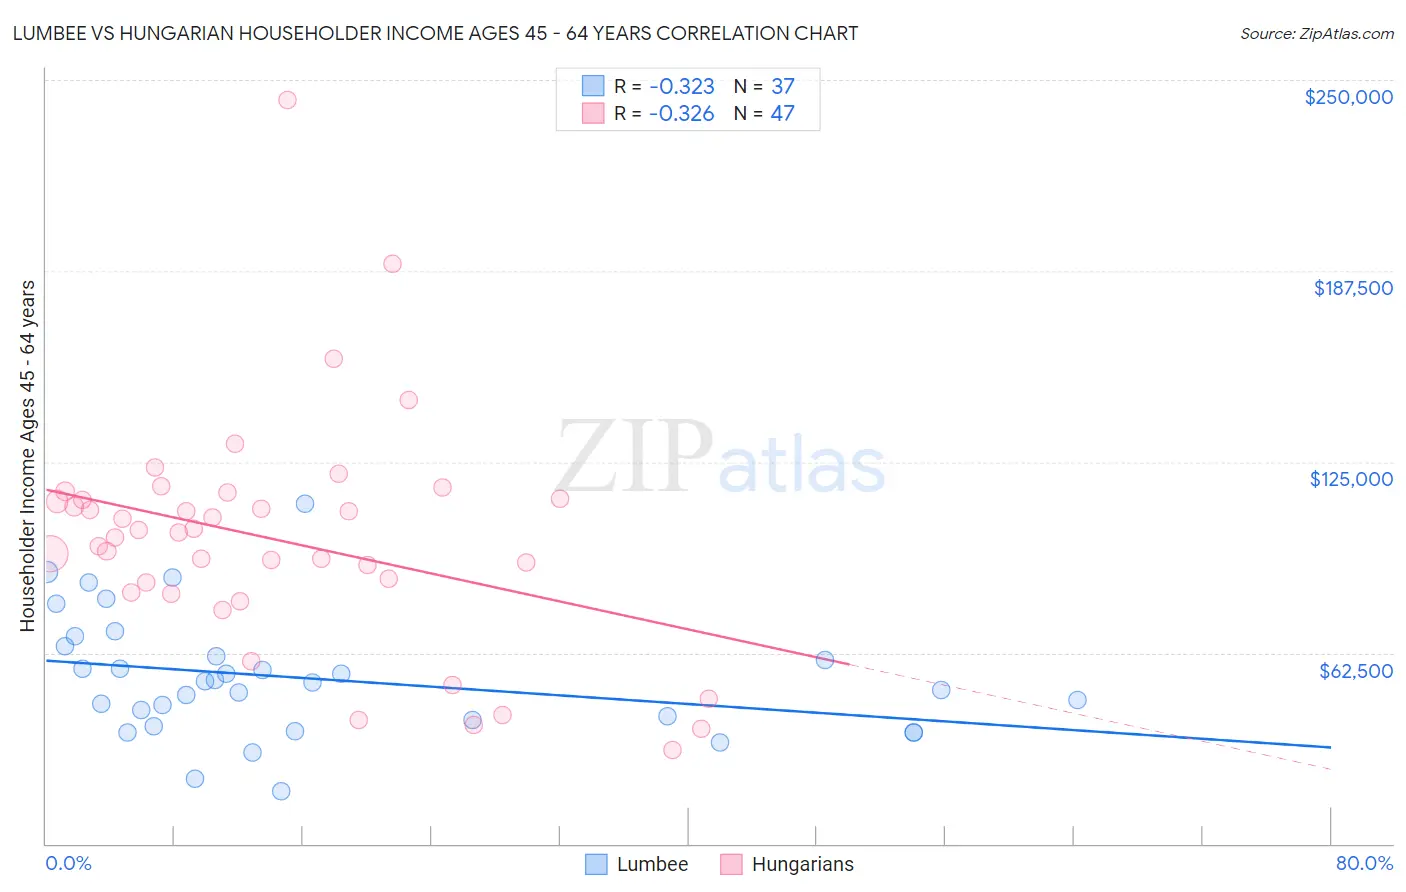 Lumbee vs Hungarian Householder Income Ages 45 - 64 years